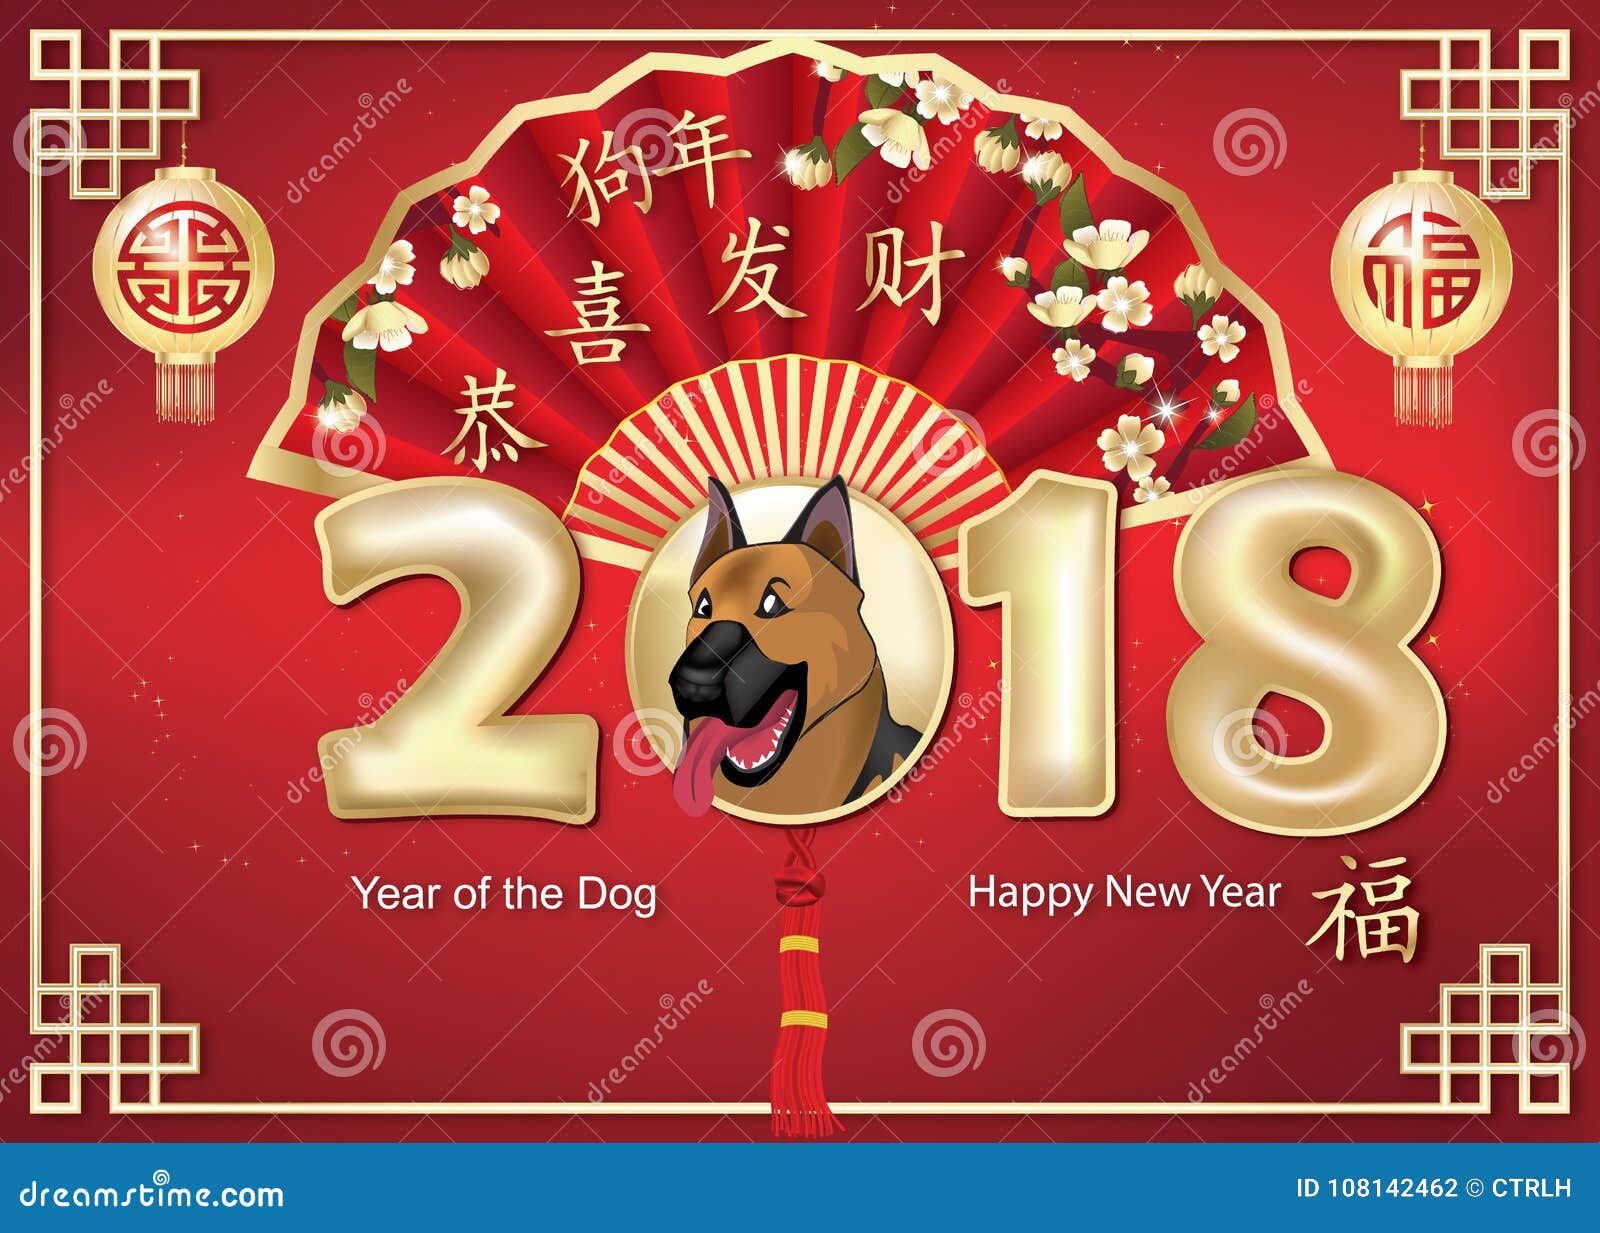 Chinese New Year Red Envelope Stock Illustrations – 4,274 Chinese New Year  Red Envelope Stock Illustrations, Vectors & Clipart - Dreamstime